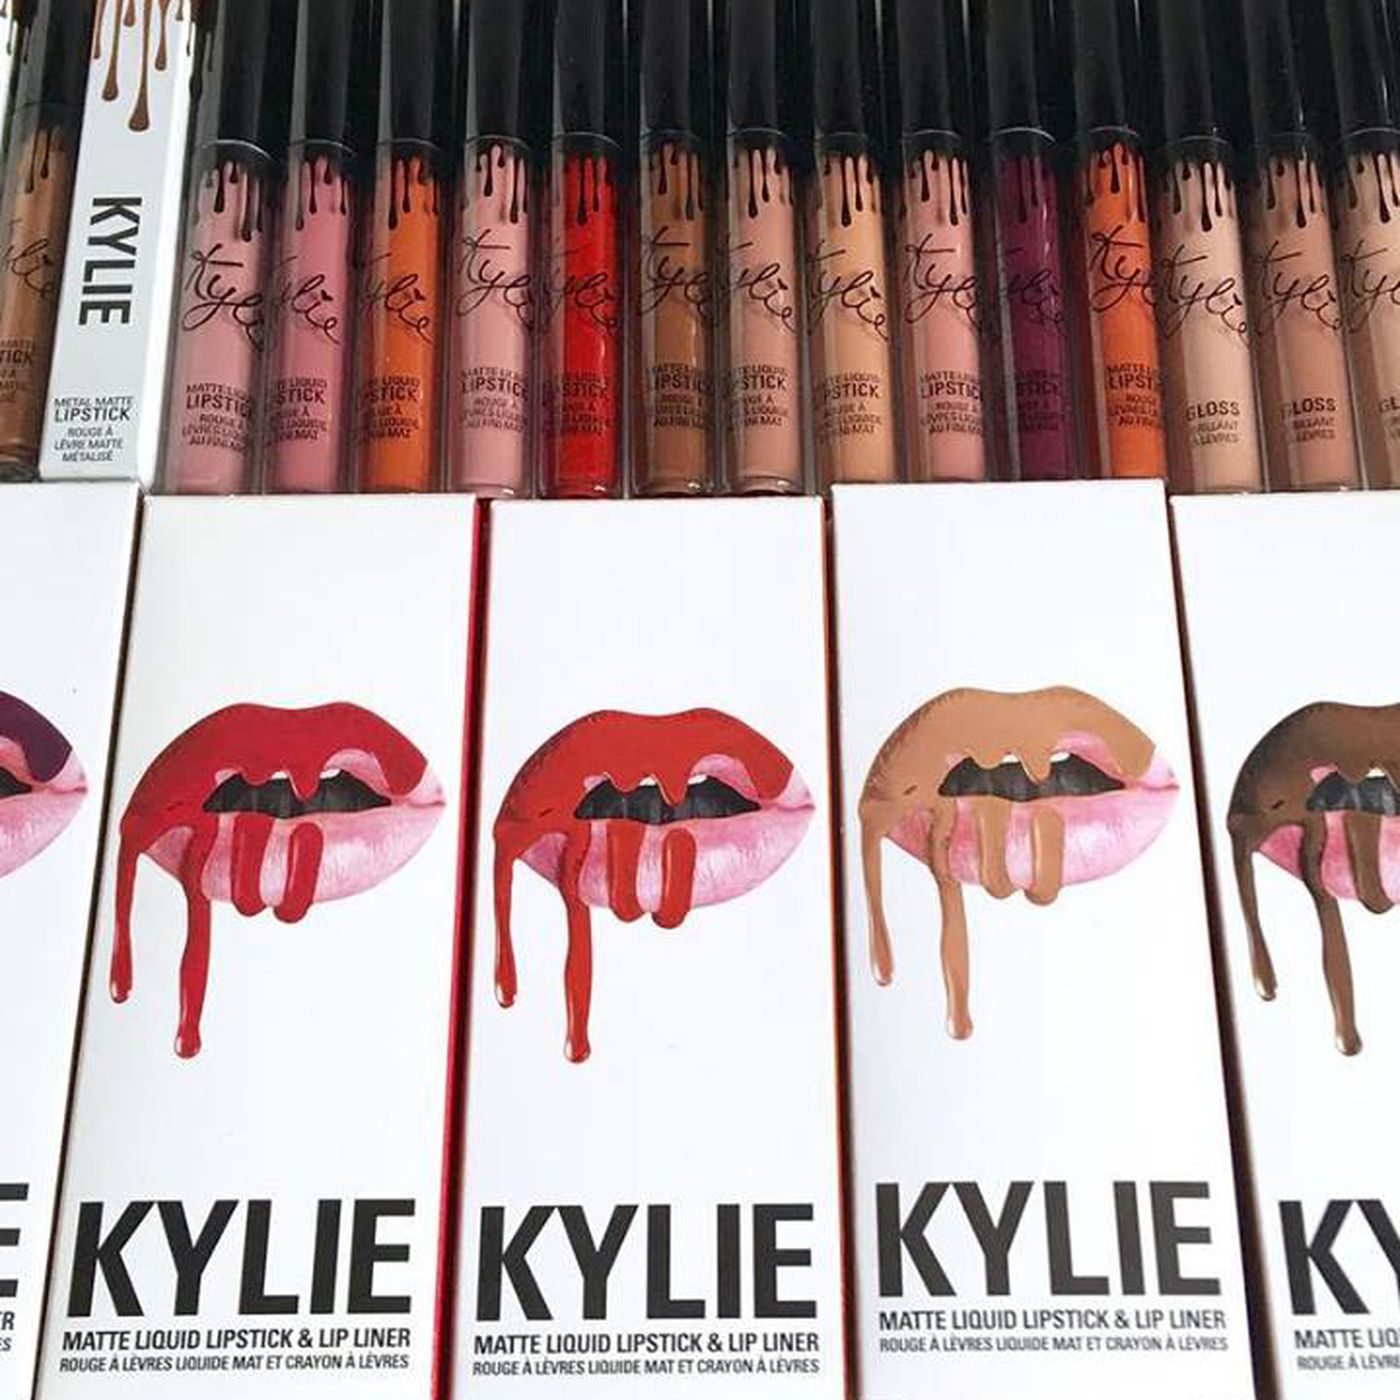 Kylie Jenner Is Planning to Open a Kylie Cosmetics Store -